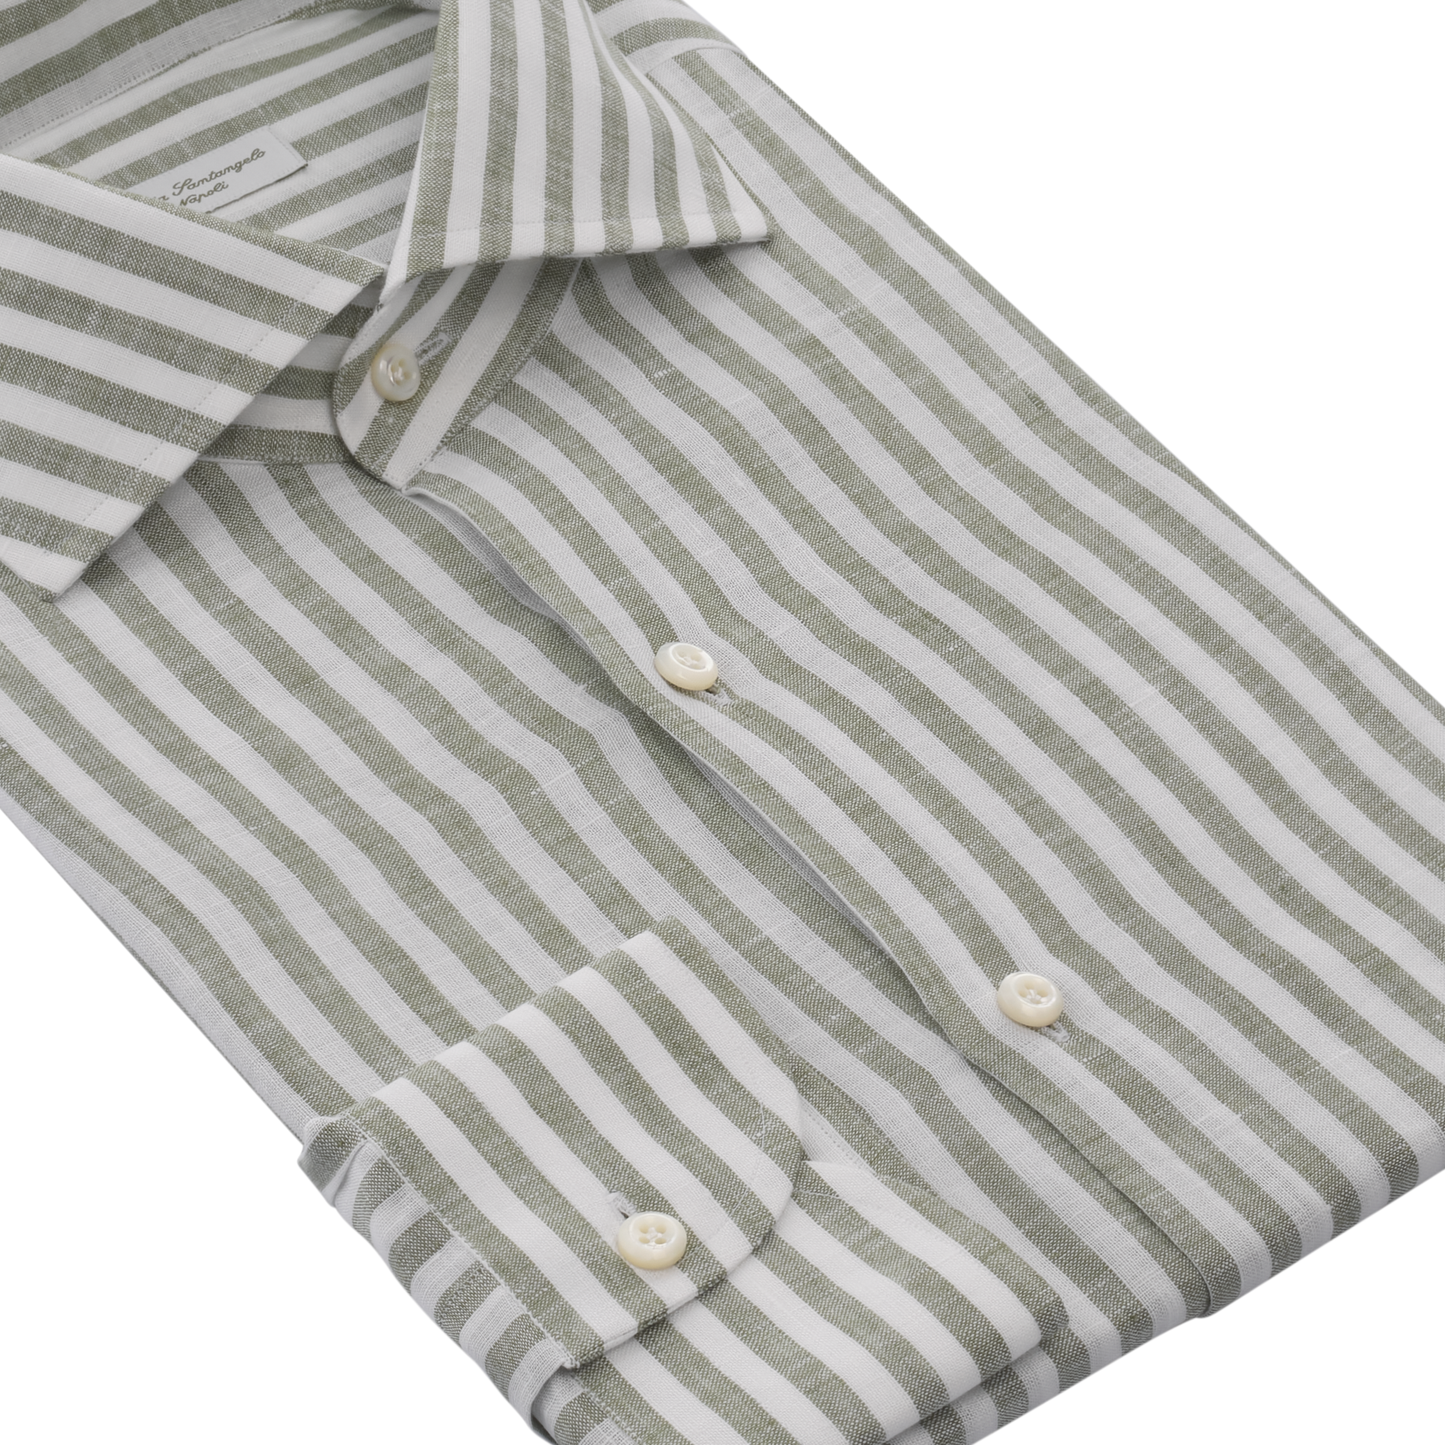 Striped Linen Shirt in Green and White